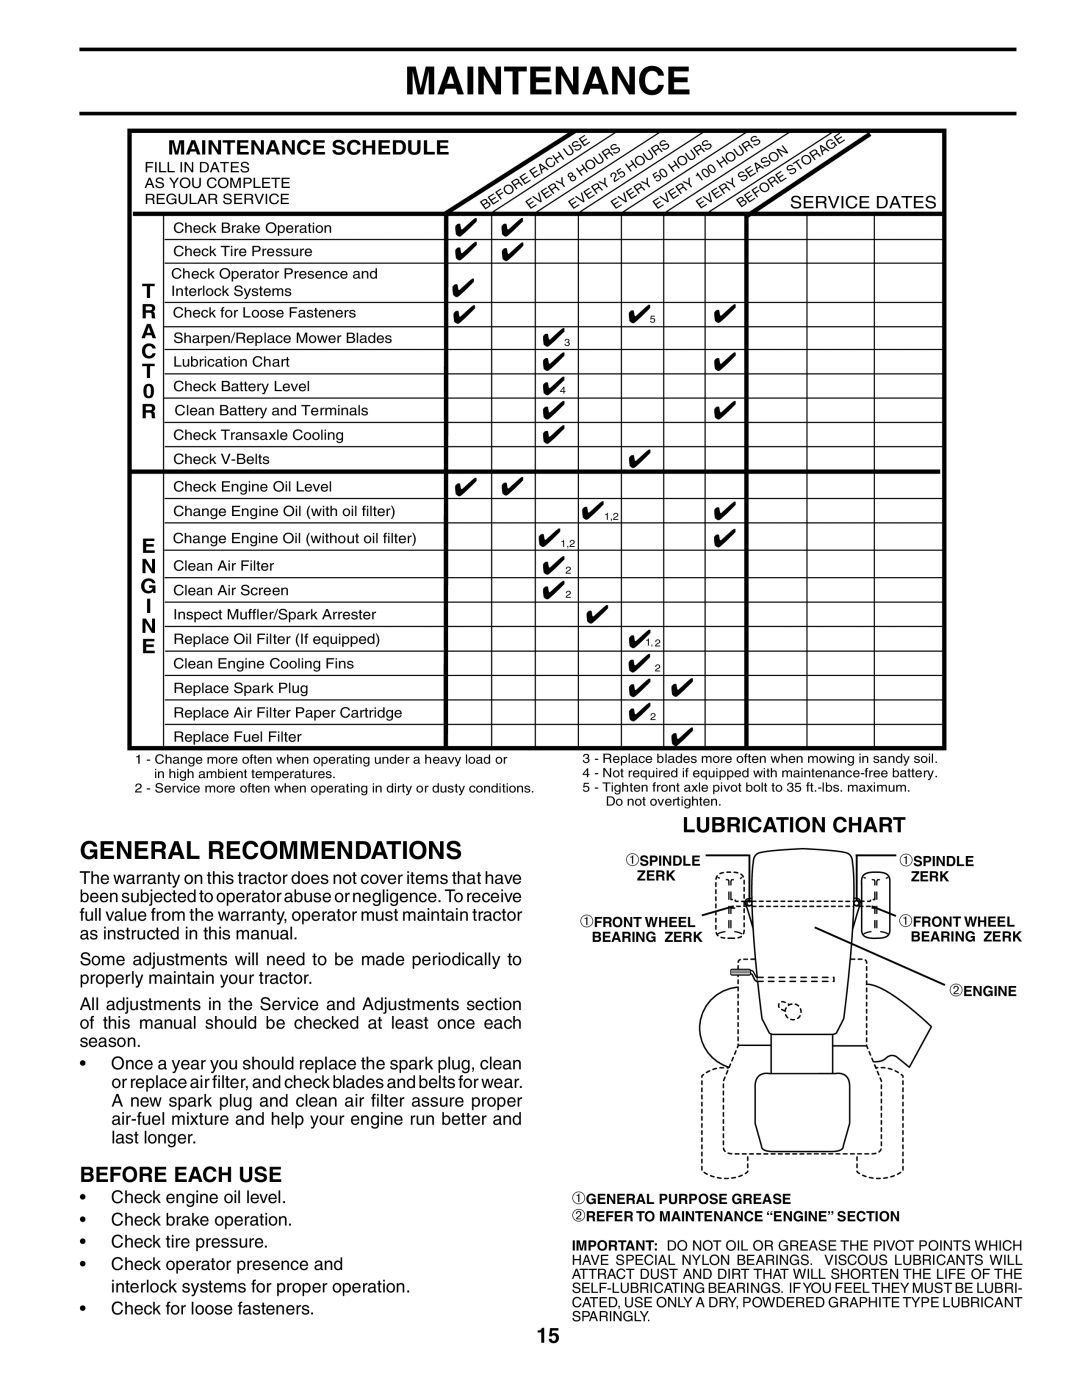 Husqvarna YTH2242 owner manual General Recommendations, Lubrication Chart, Before Each Use, Maintenance Schedule 